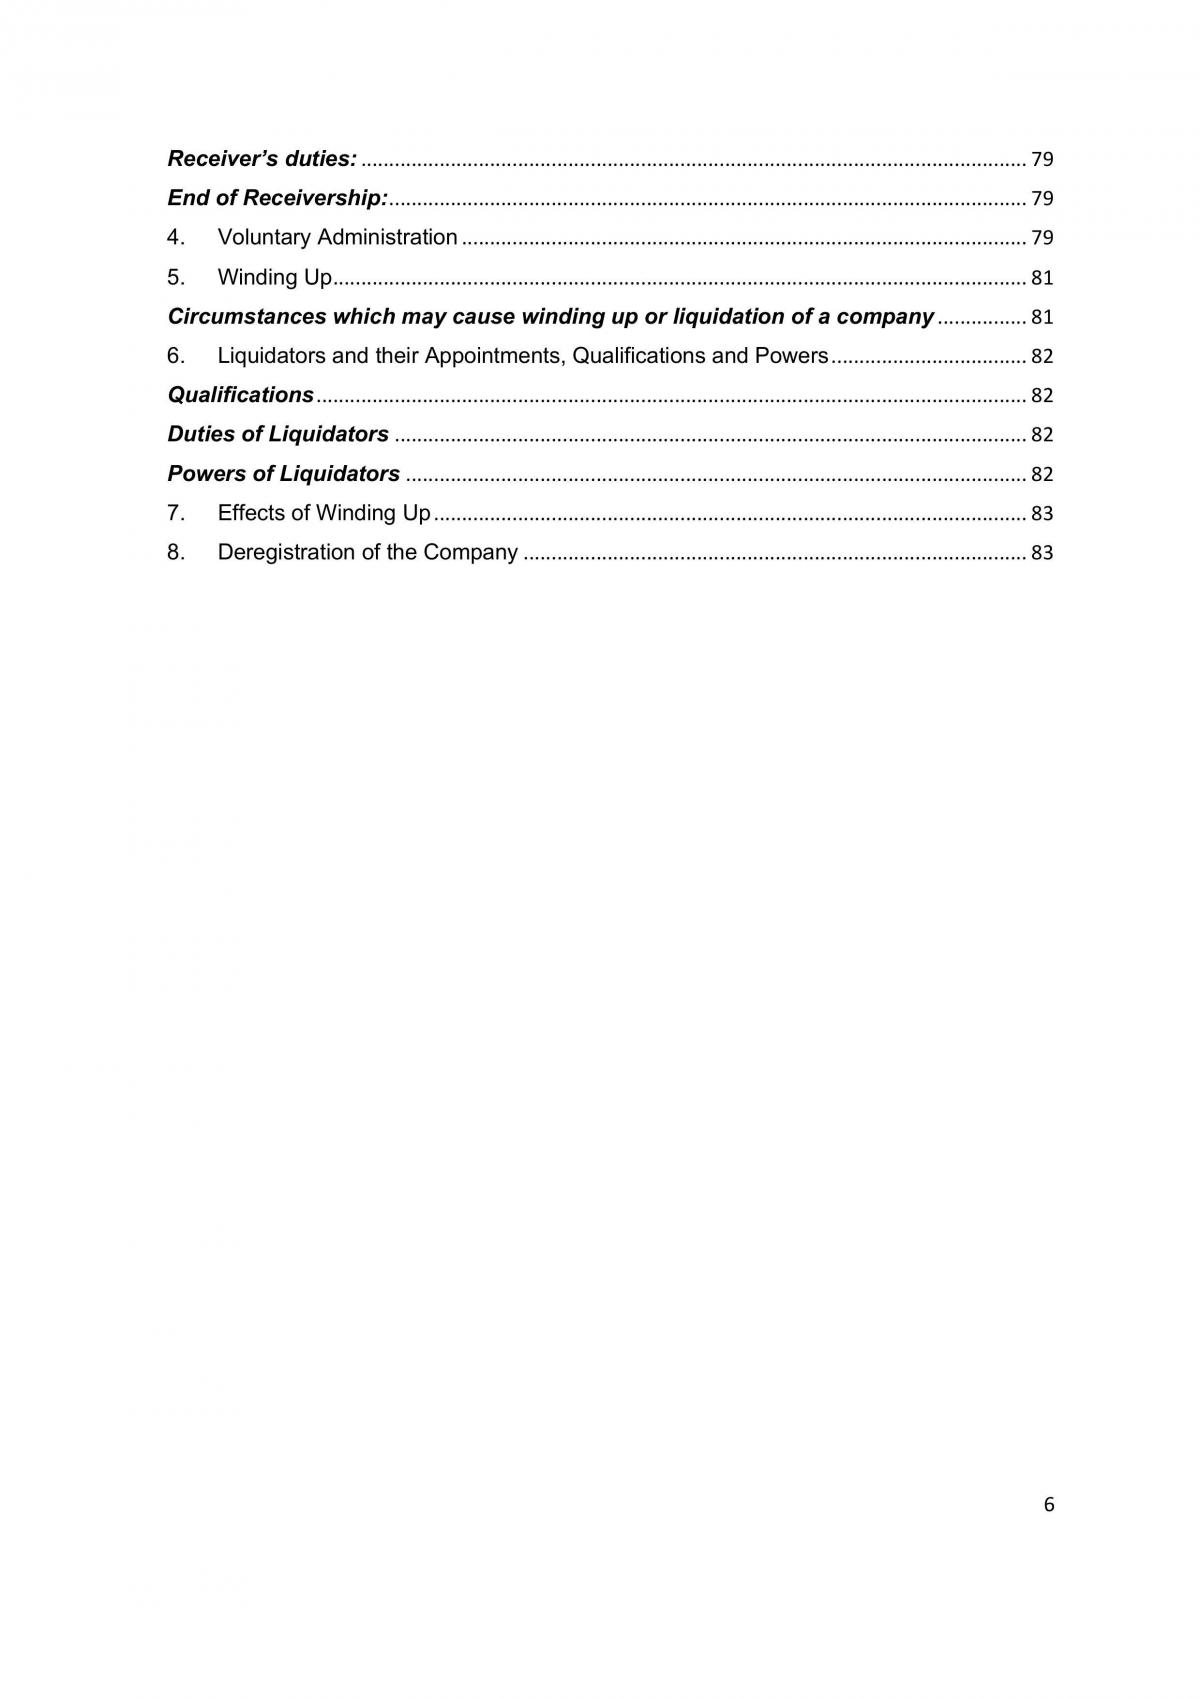 Corporations Law - LAW251 - Page 6